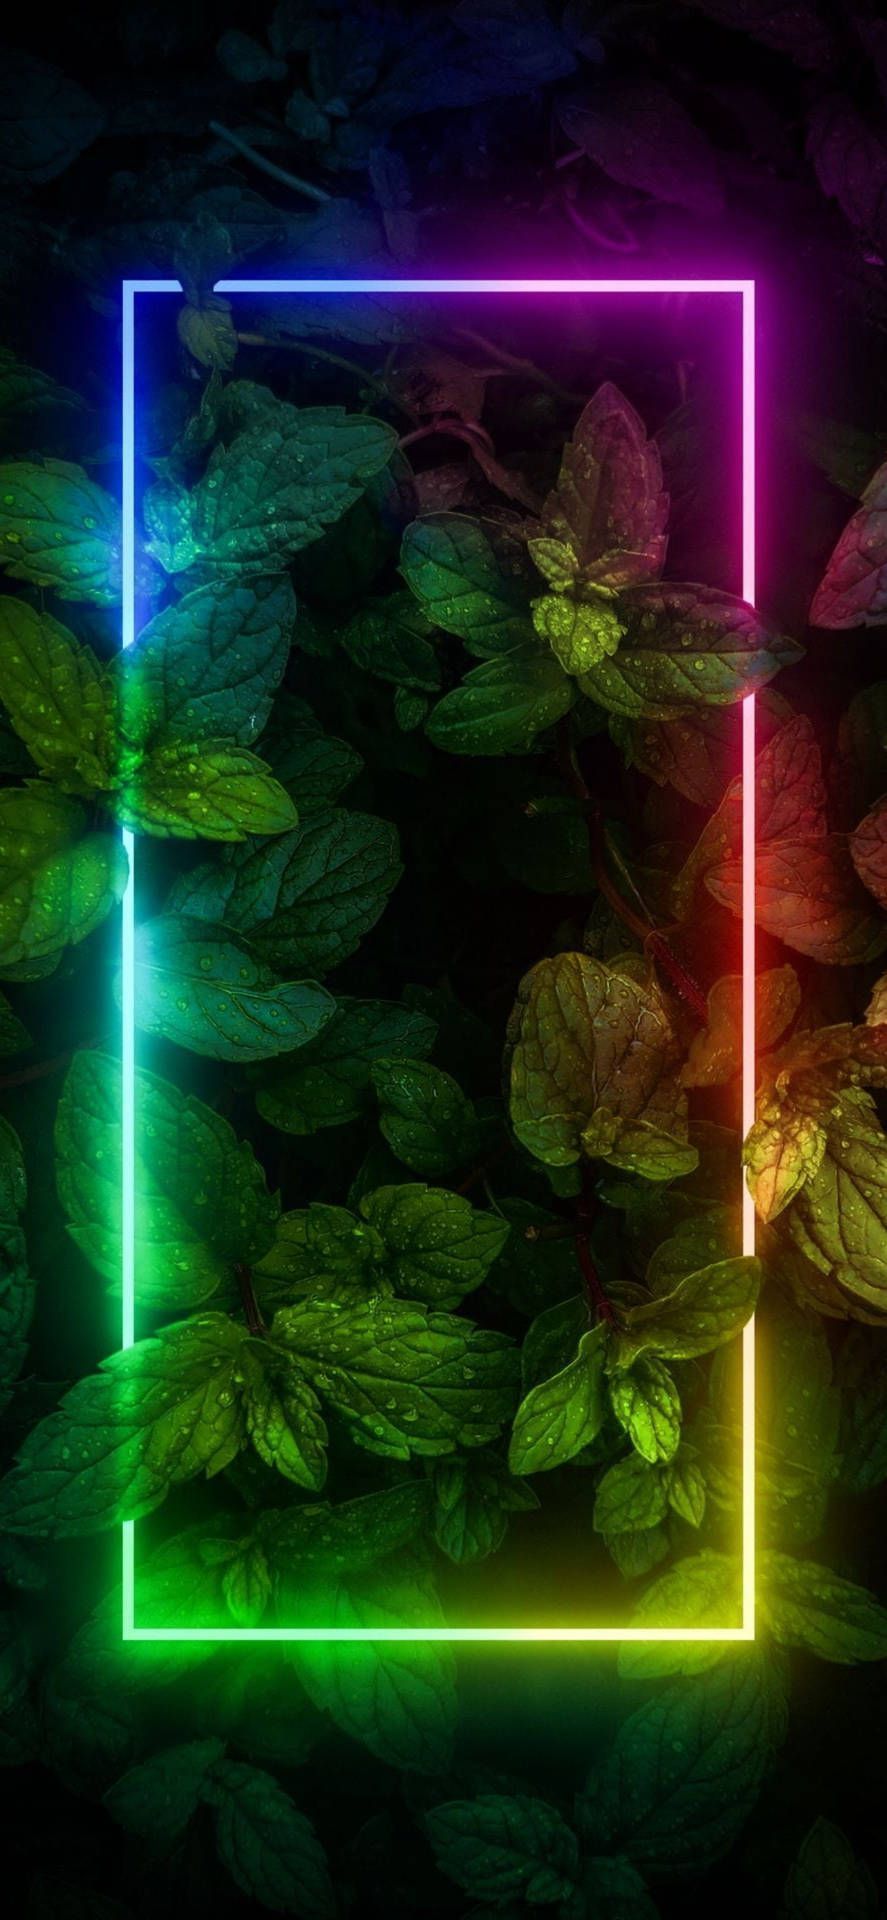 Download Plants With Border Neon Aesthetic iPhone Wallpaper